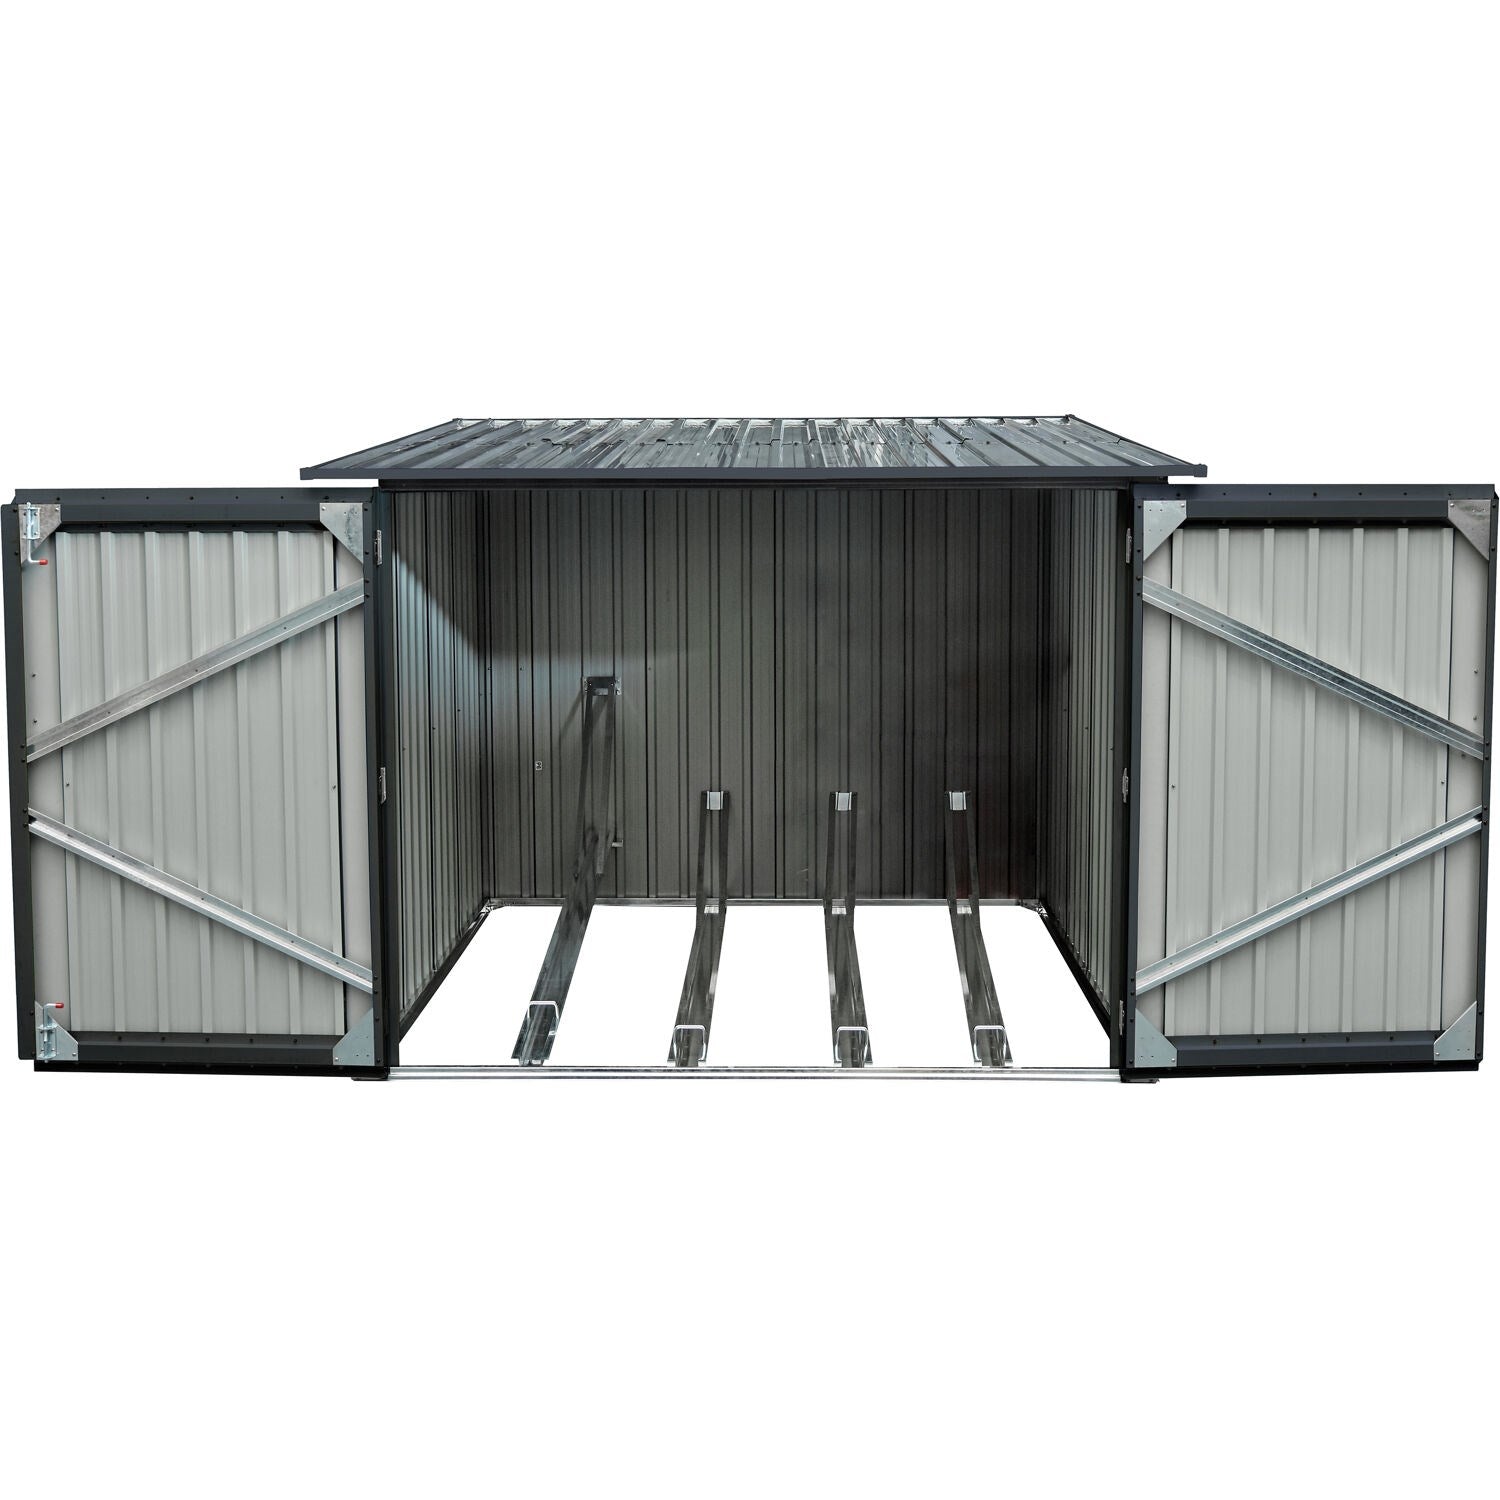 Hanover Galvanized Steel Bicycle Storage Shed with Twist Lock and Key for up to 4 Bikes, Dark Gray